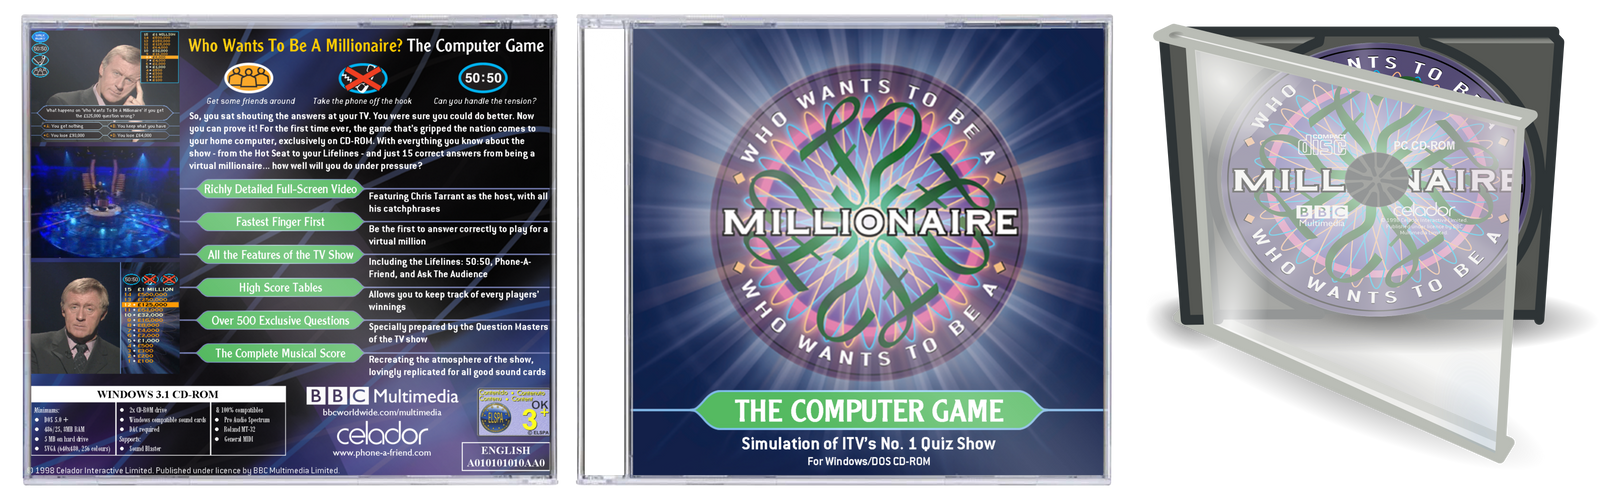 Who Wants To Be A Millionaire Template For Mac